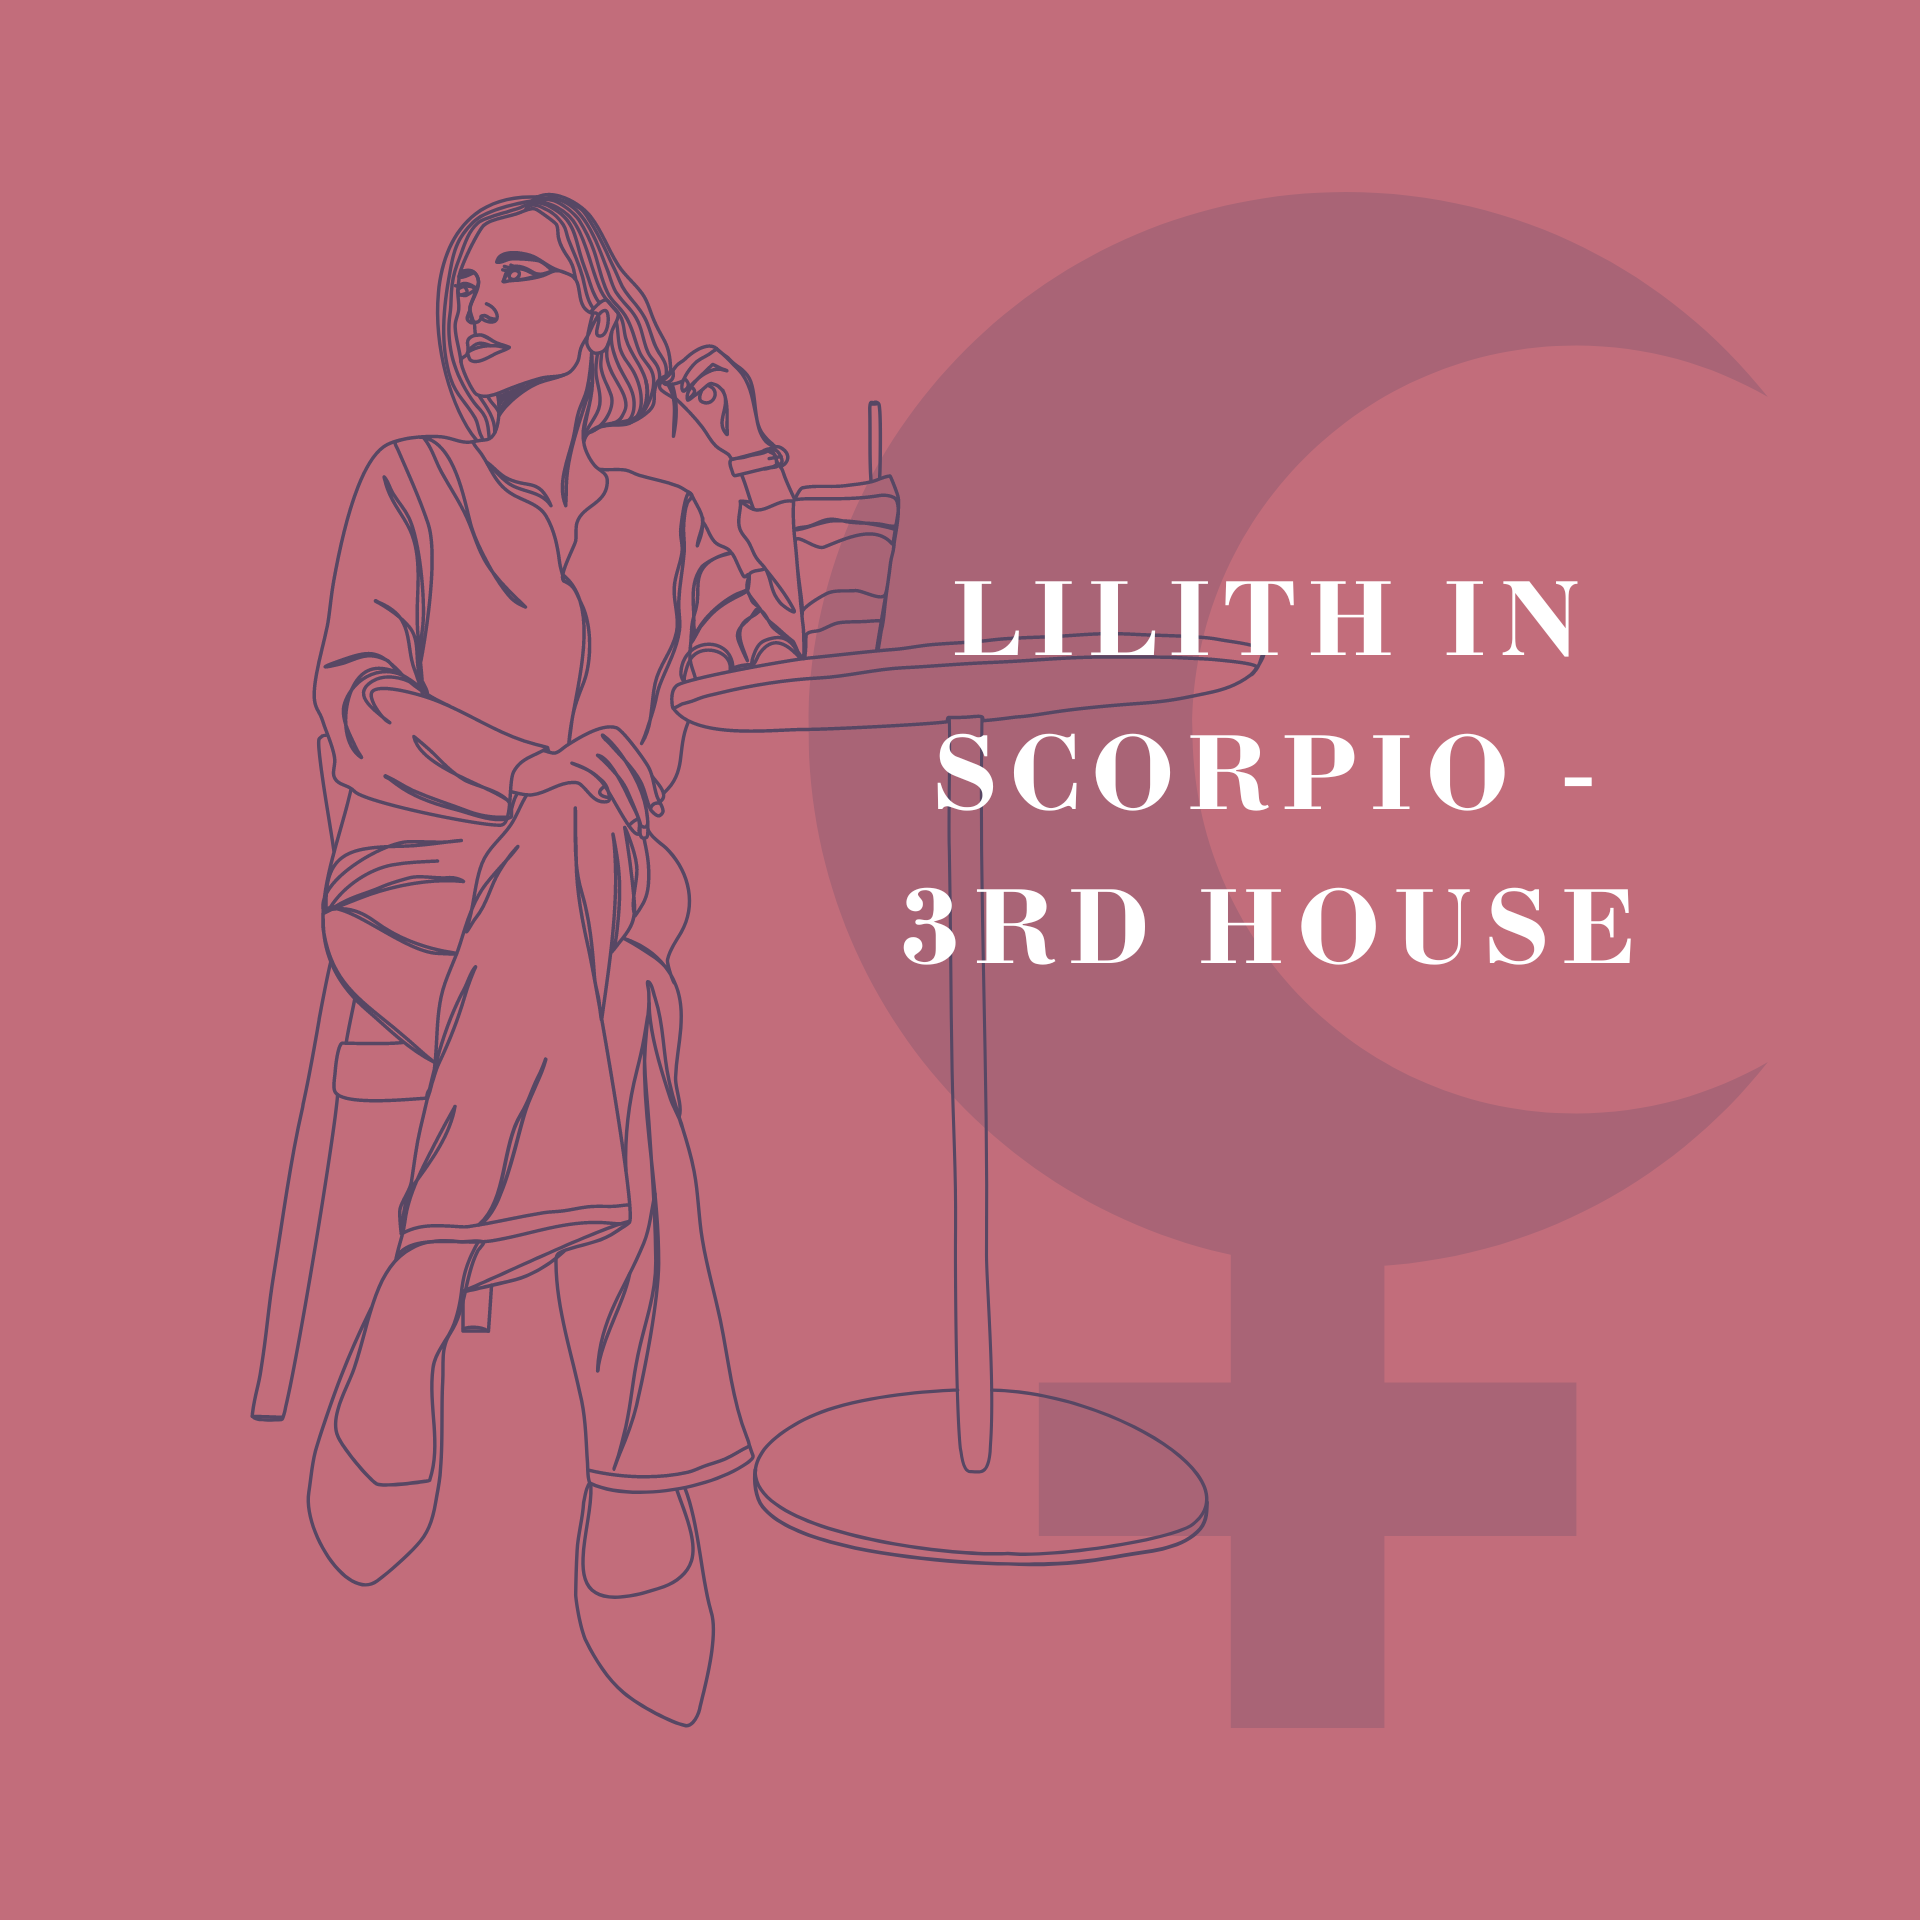 Lilith in Scorpio - 3rd House